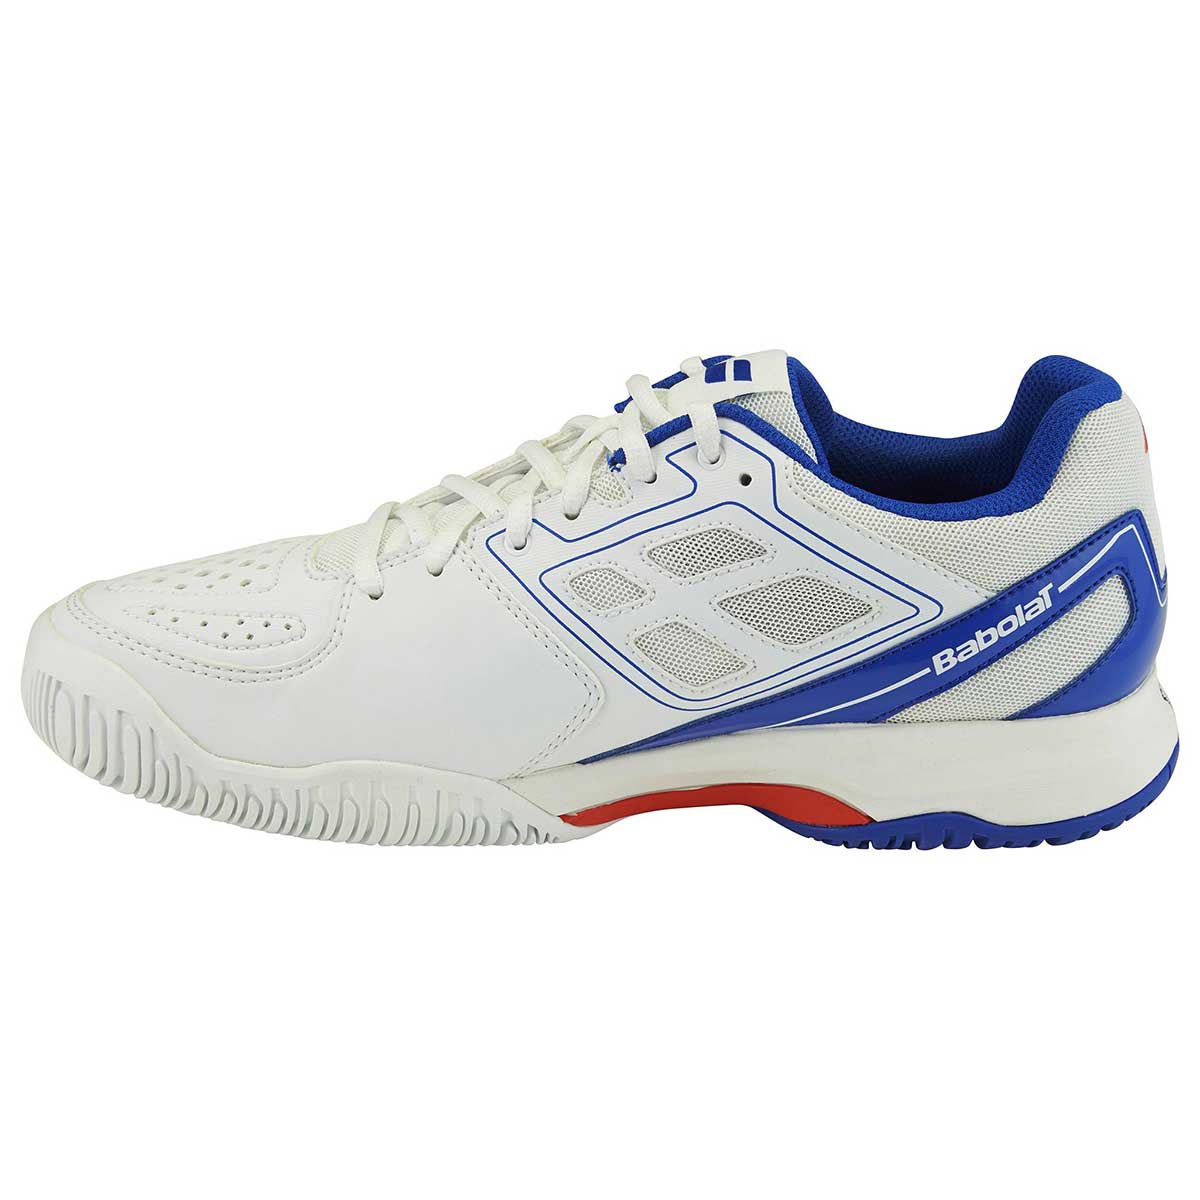 Buy Babolat Pulsion All Court Tennis Shoes Online India